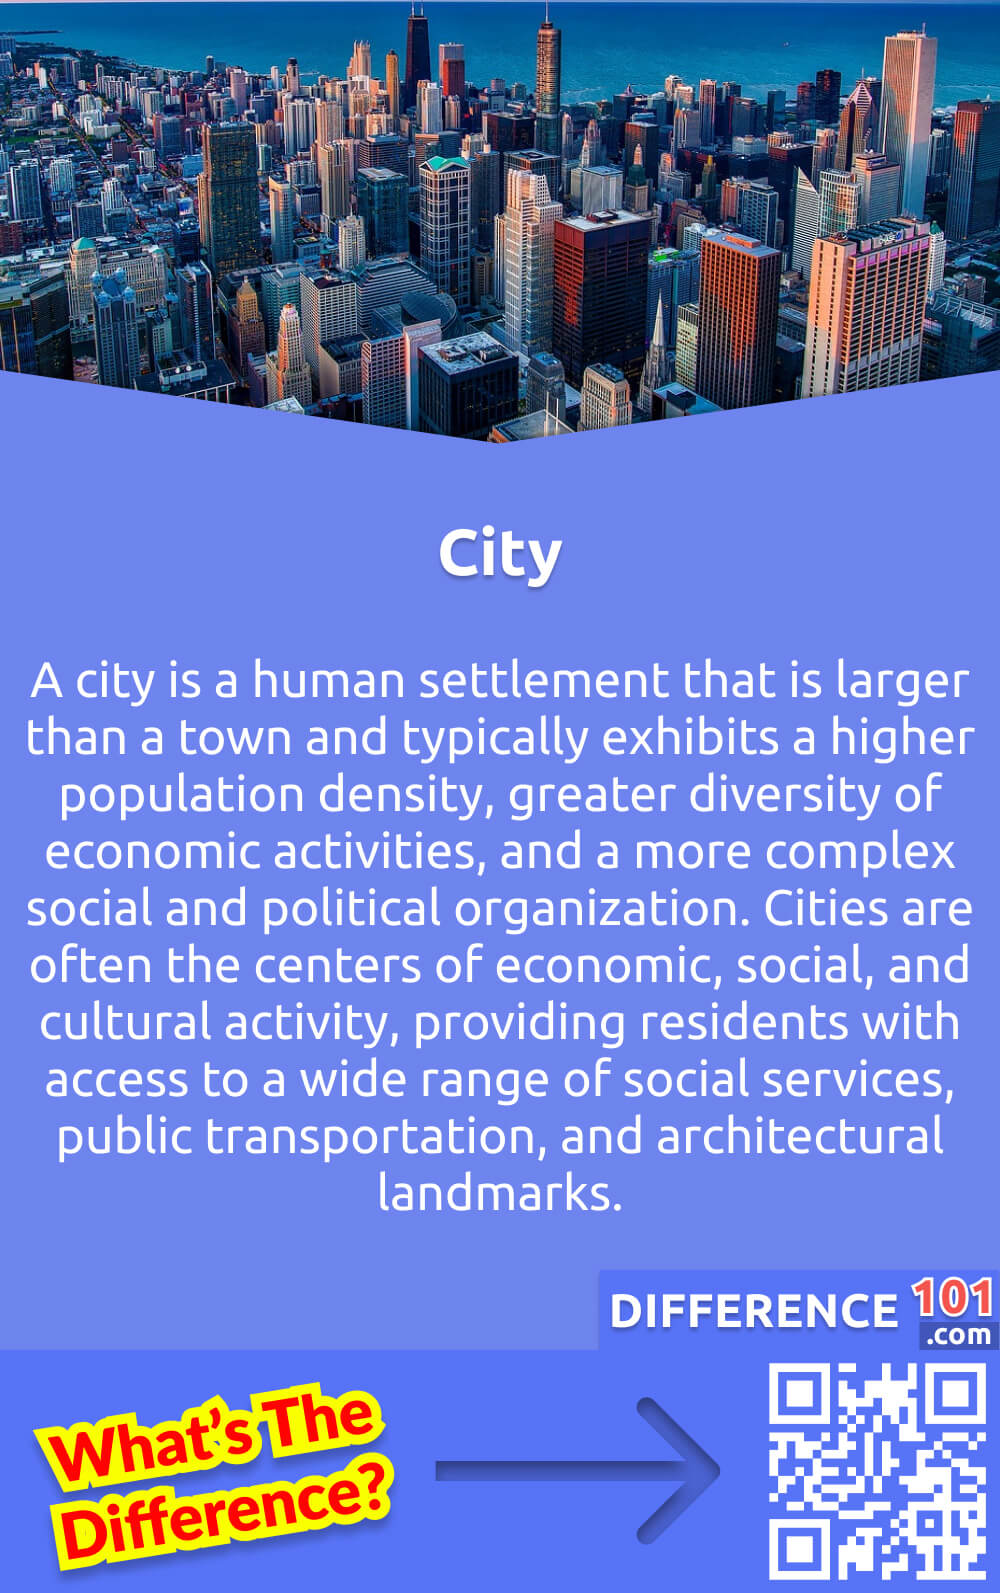 What Is City? A city is a human settlement that is larger than a town and typically exhibits a higher population density, greater diversity of economic activities, and a more complex social and political organization. Cities are often the centers of economic, social, and cultural activity, providing residents with access to a wide range of social services, public transportation, and architectural landmarks. From bustling financial districts to lively residential neighborhoods, cities are characterized by their diversity of architecture, people, and ideas. The complex social and economic relationships in cities often give rise to complex political organizations, including municipal governments, city councils, and mayors. Ultimately, cities play a vital role in shaping and driving human society as we know it today.